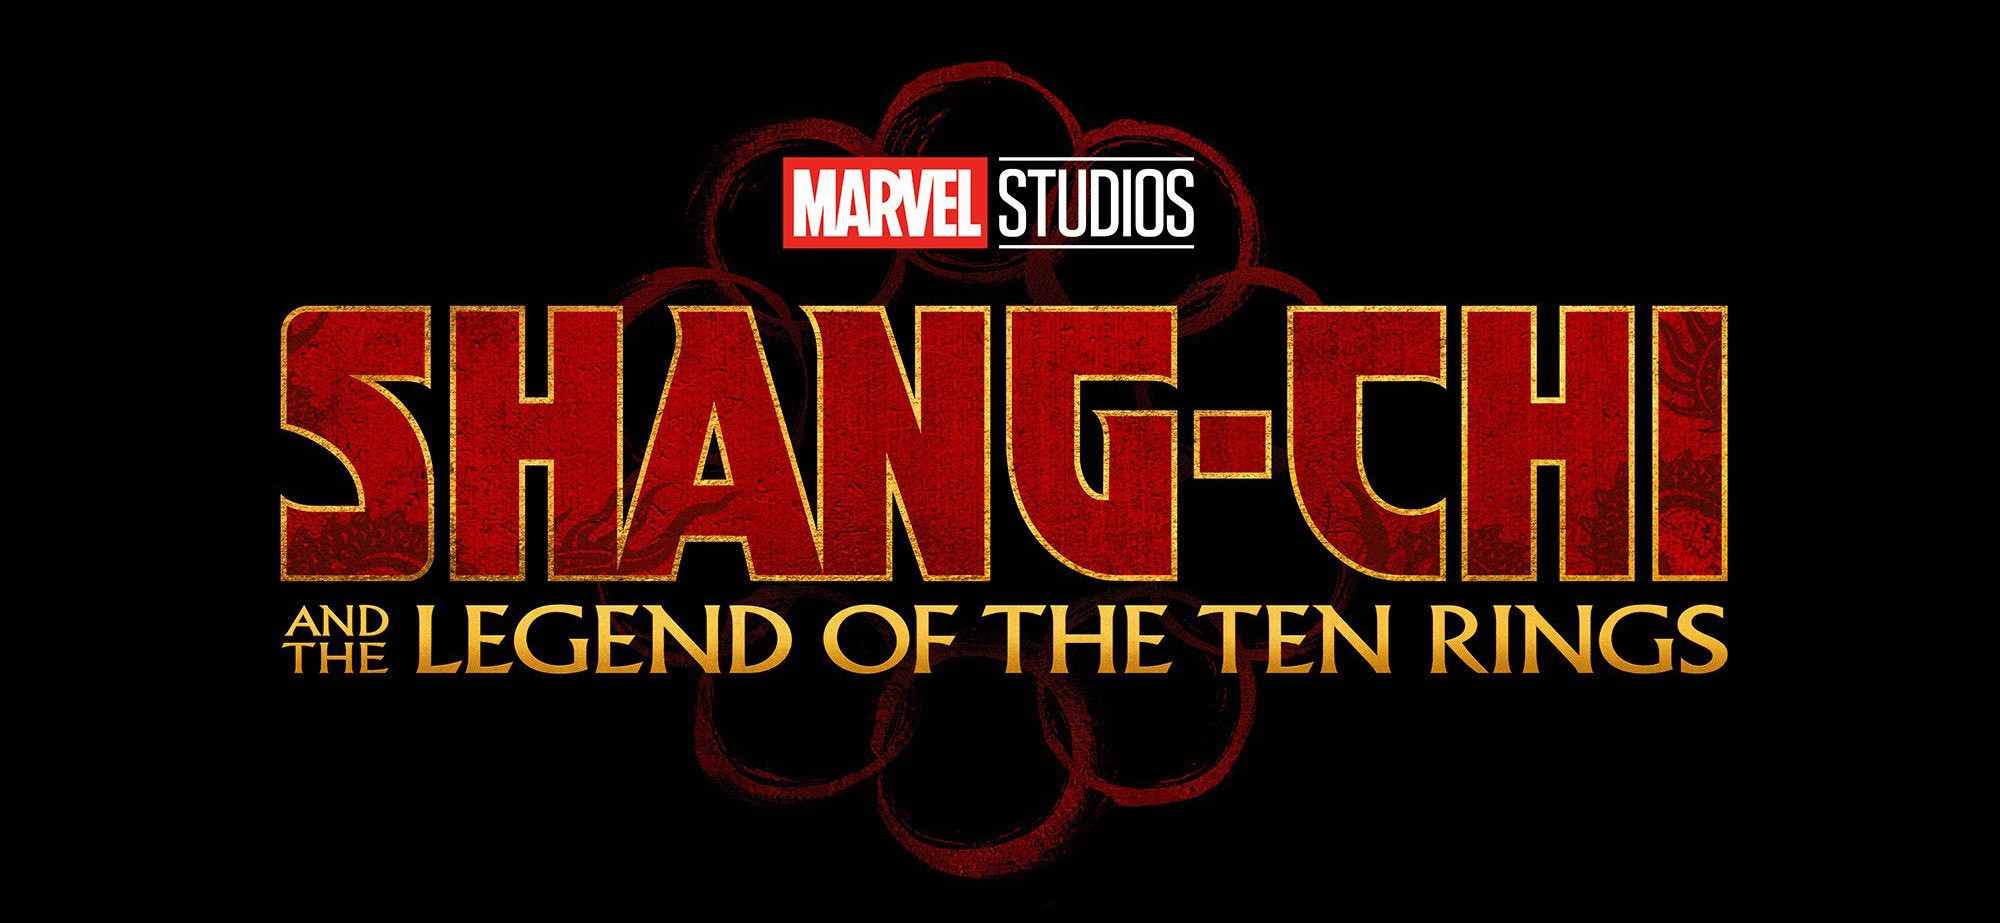 shang-chi-and-the-legend-of-the-ten-rings-feb-21-2021-pstarr_h172.jpg